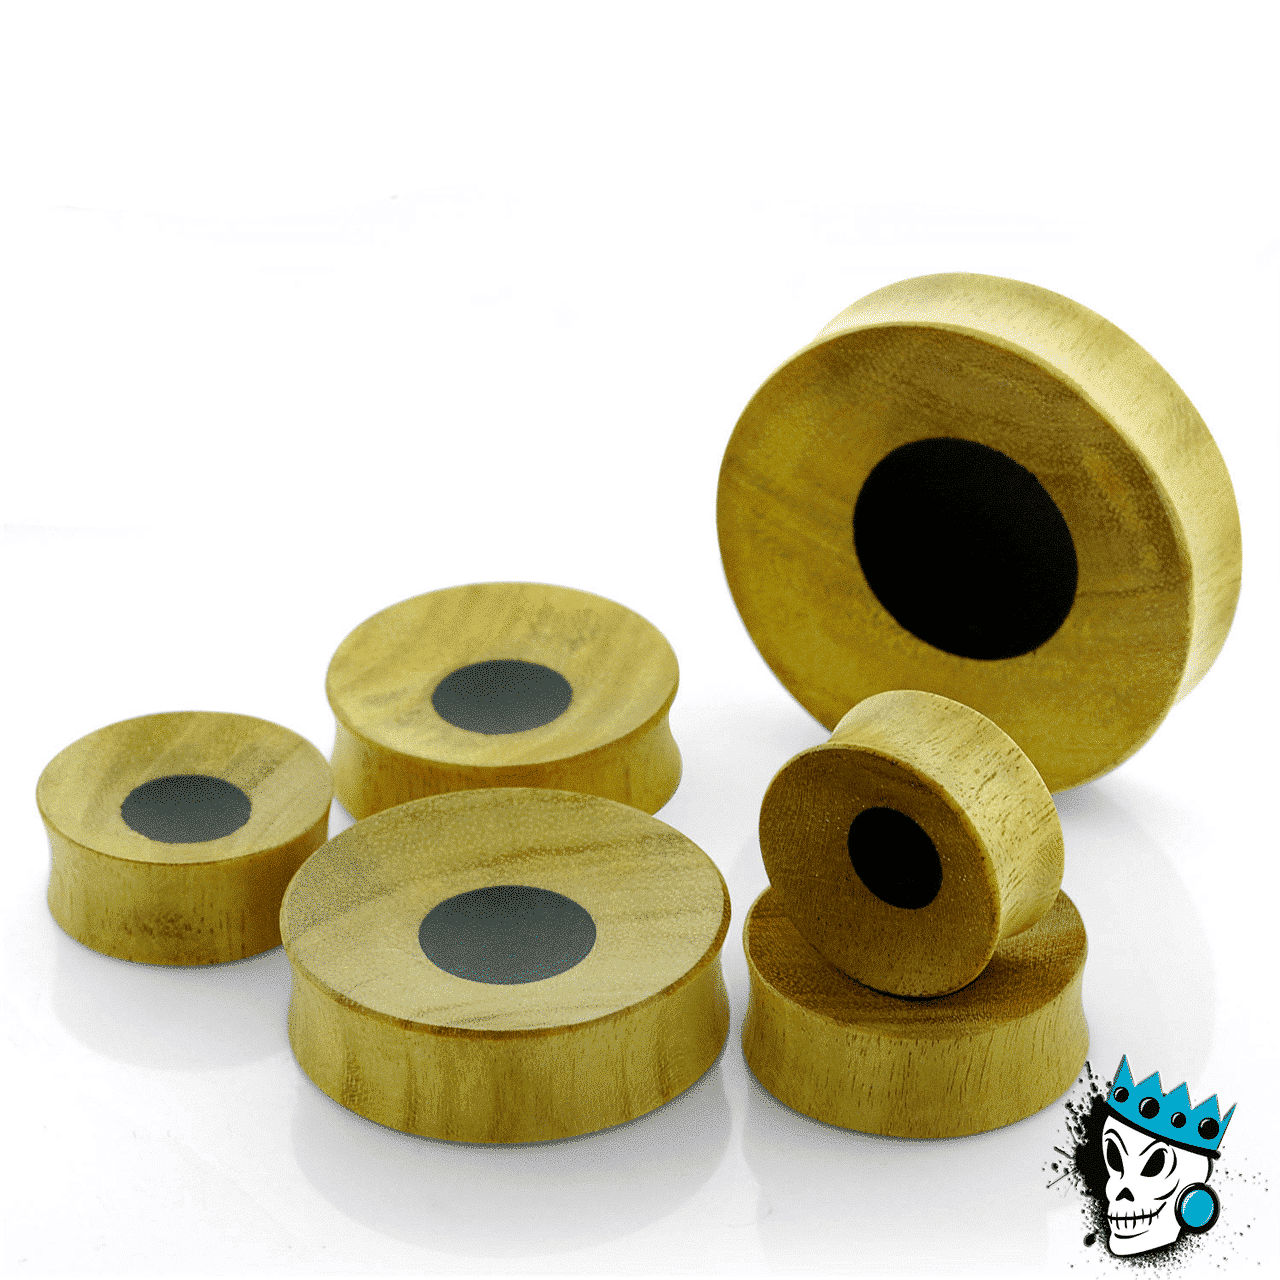 Jackfruit Concave Plugs with Black Areng Inlay  (6  guage - 2 inch)